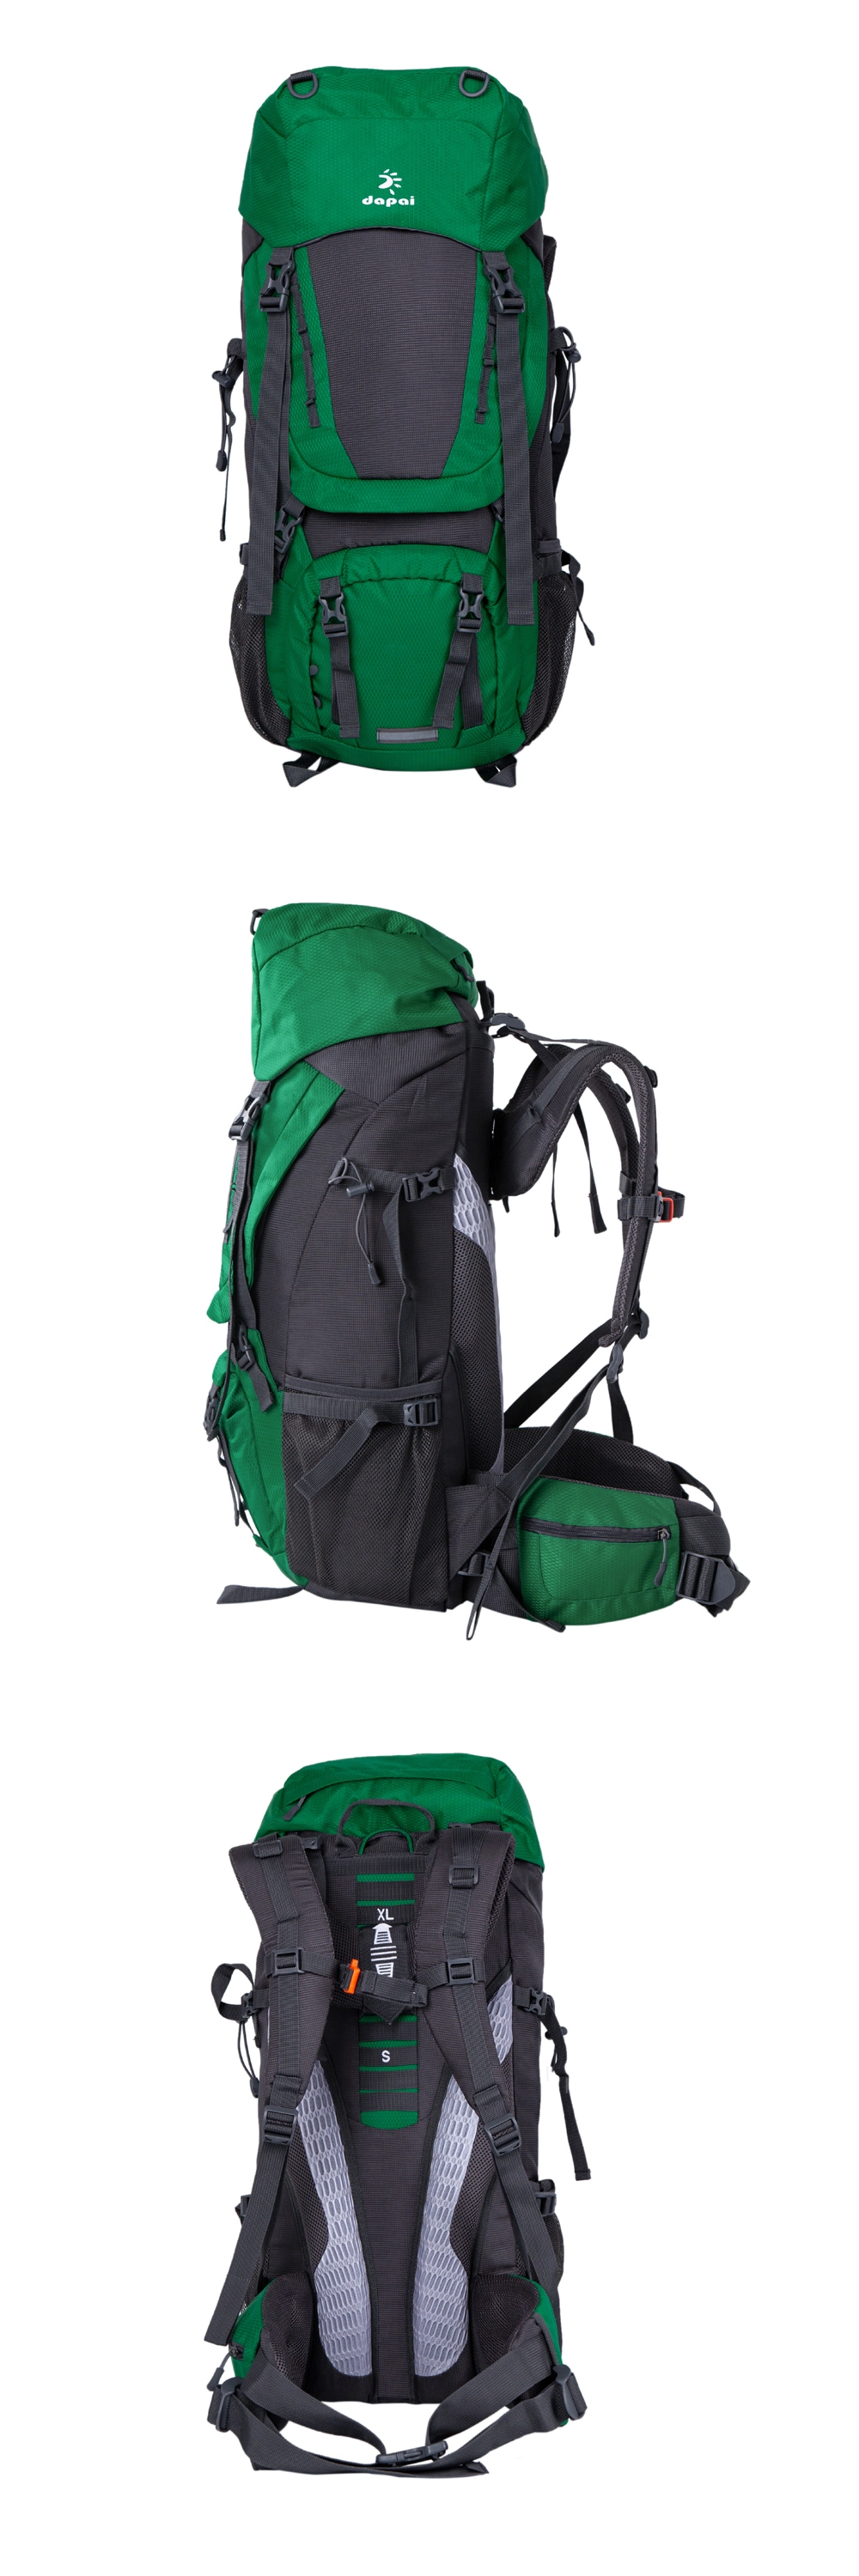 Waterproof Sports Gym Outdoor Backpack Wholesale Outdoor Backpack Large Capacity 60-70L for Hiking Camping